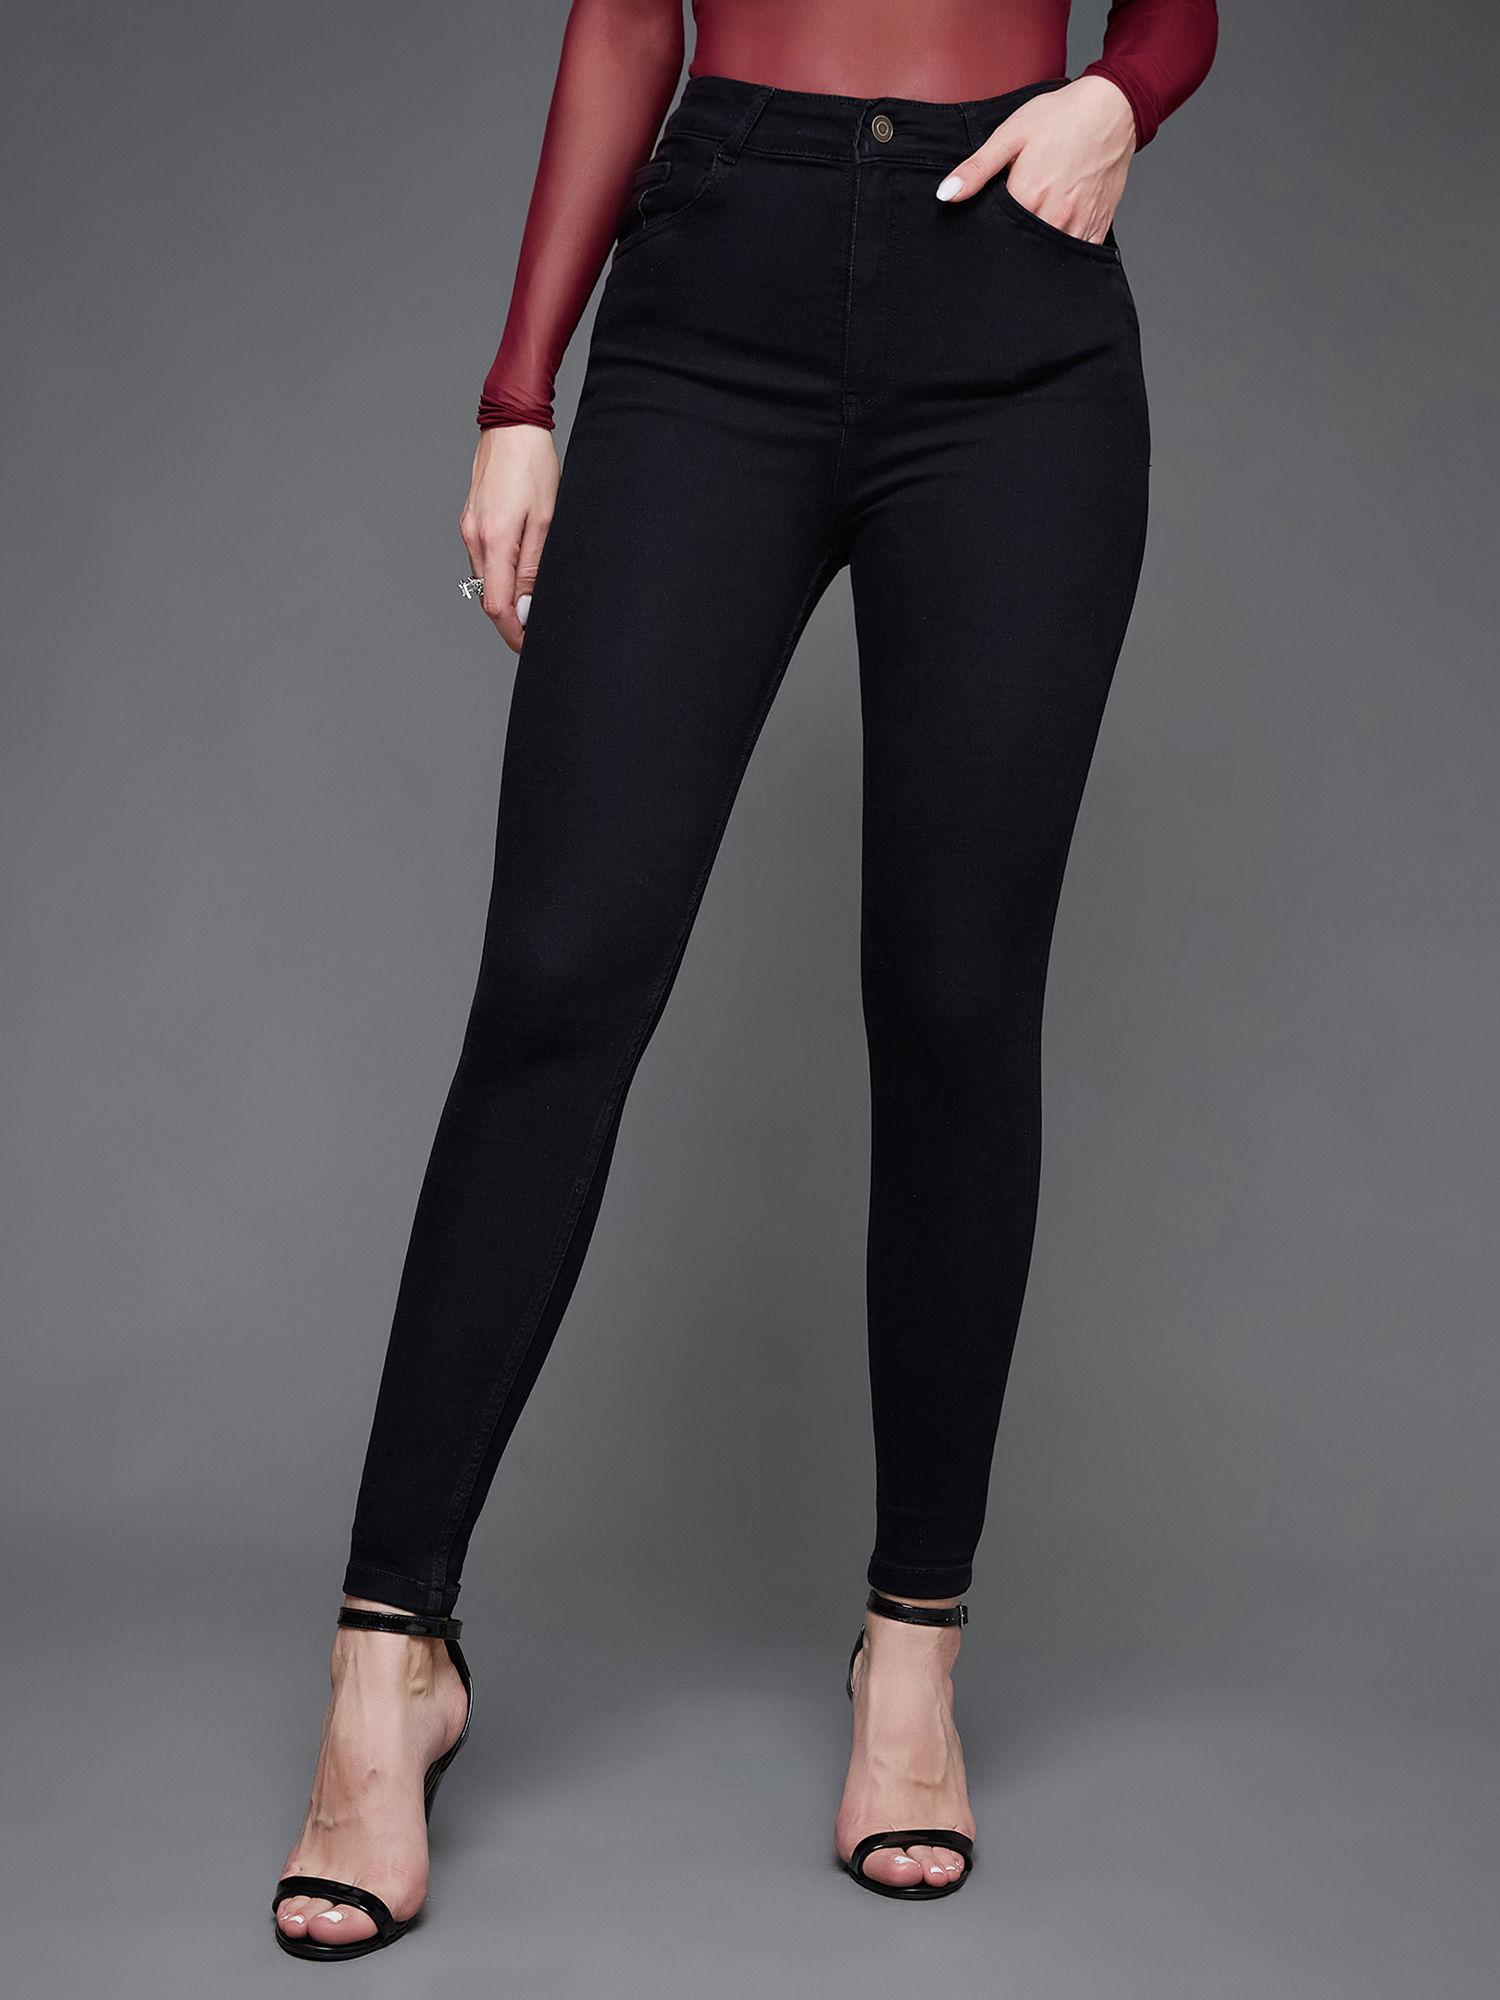 black skinny fit high rise clean look regular length clean look stretchable jeans